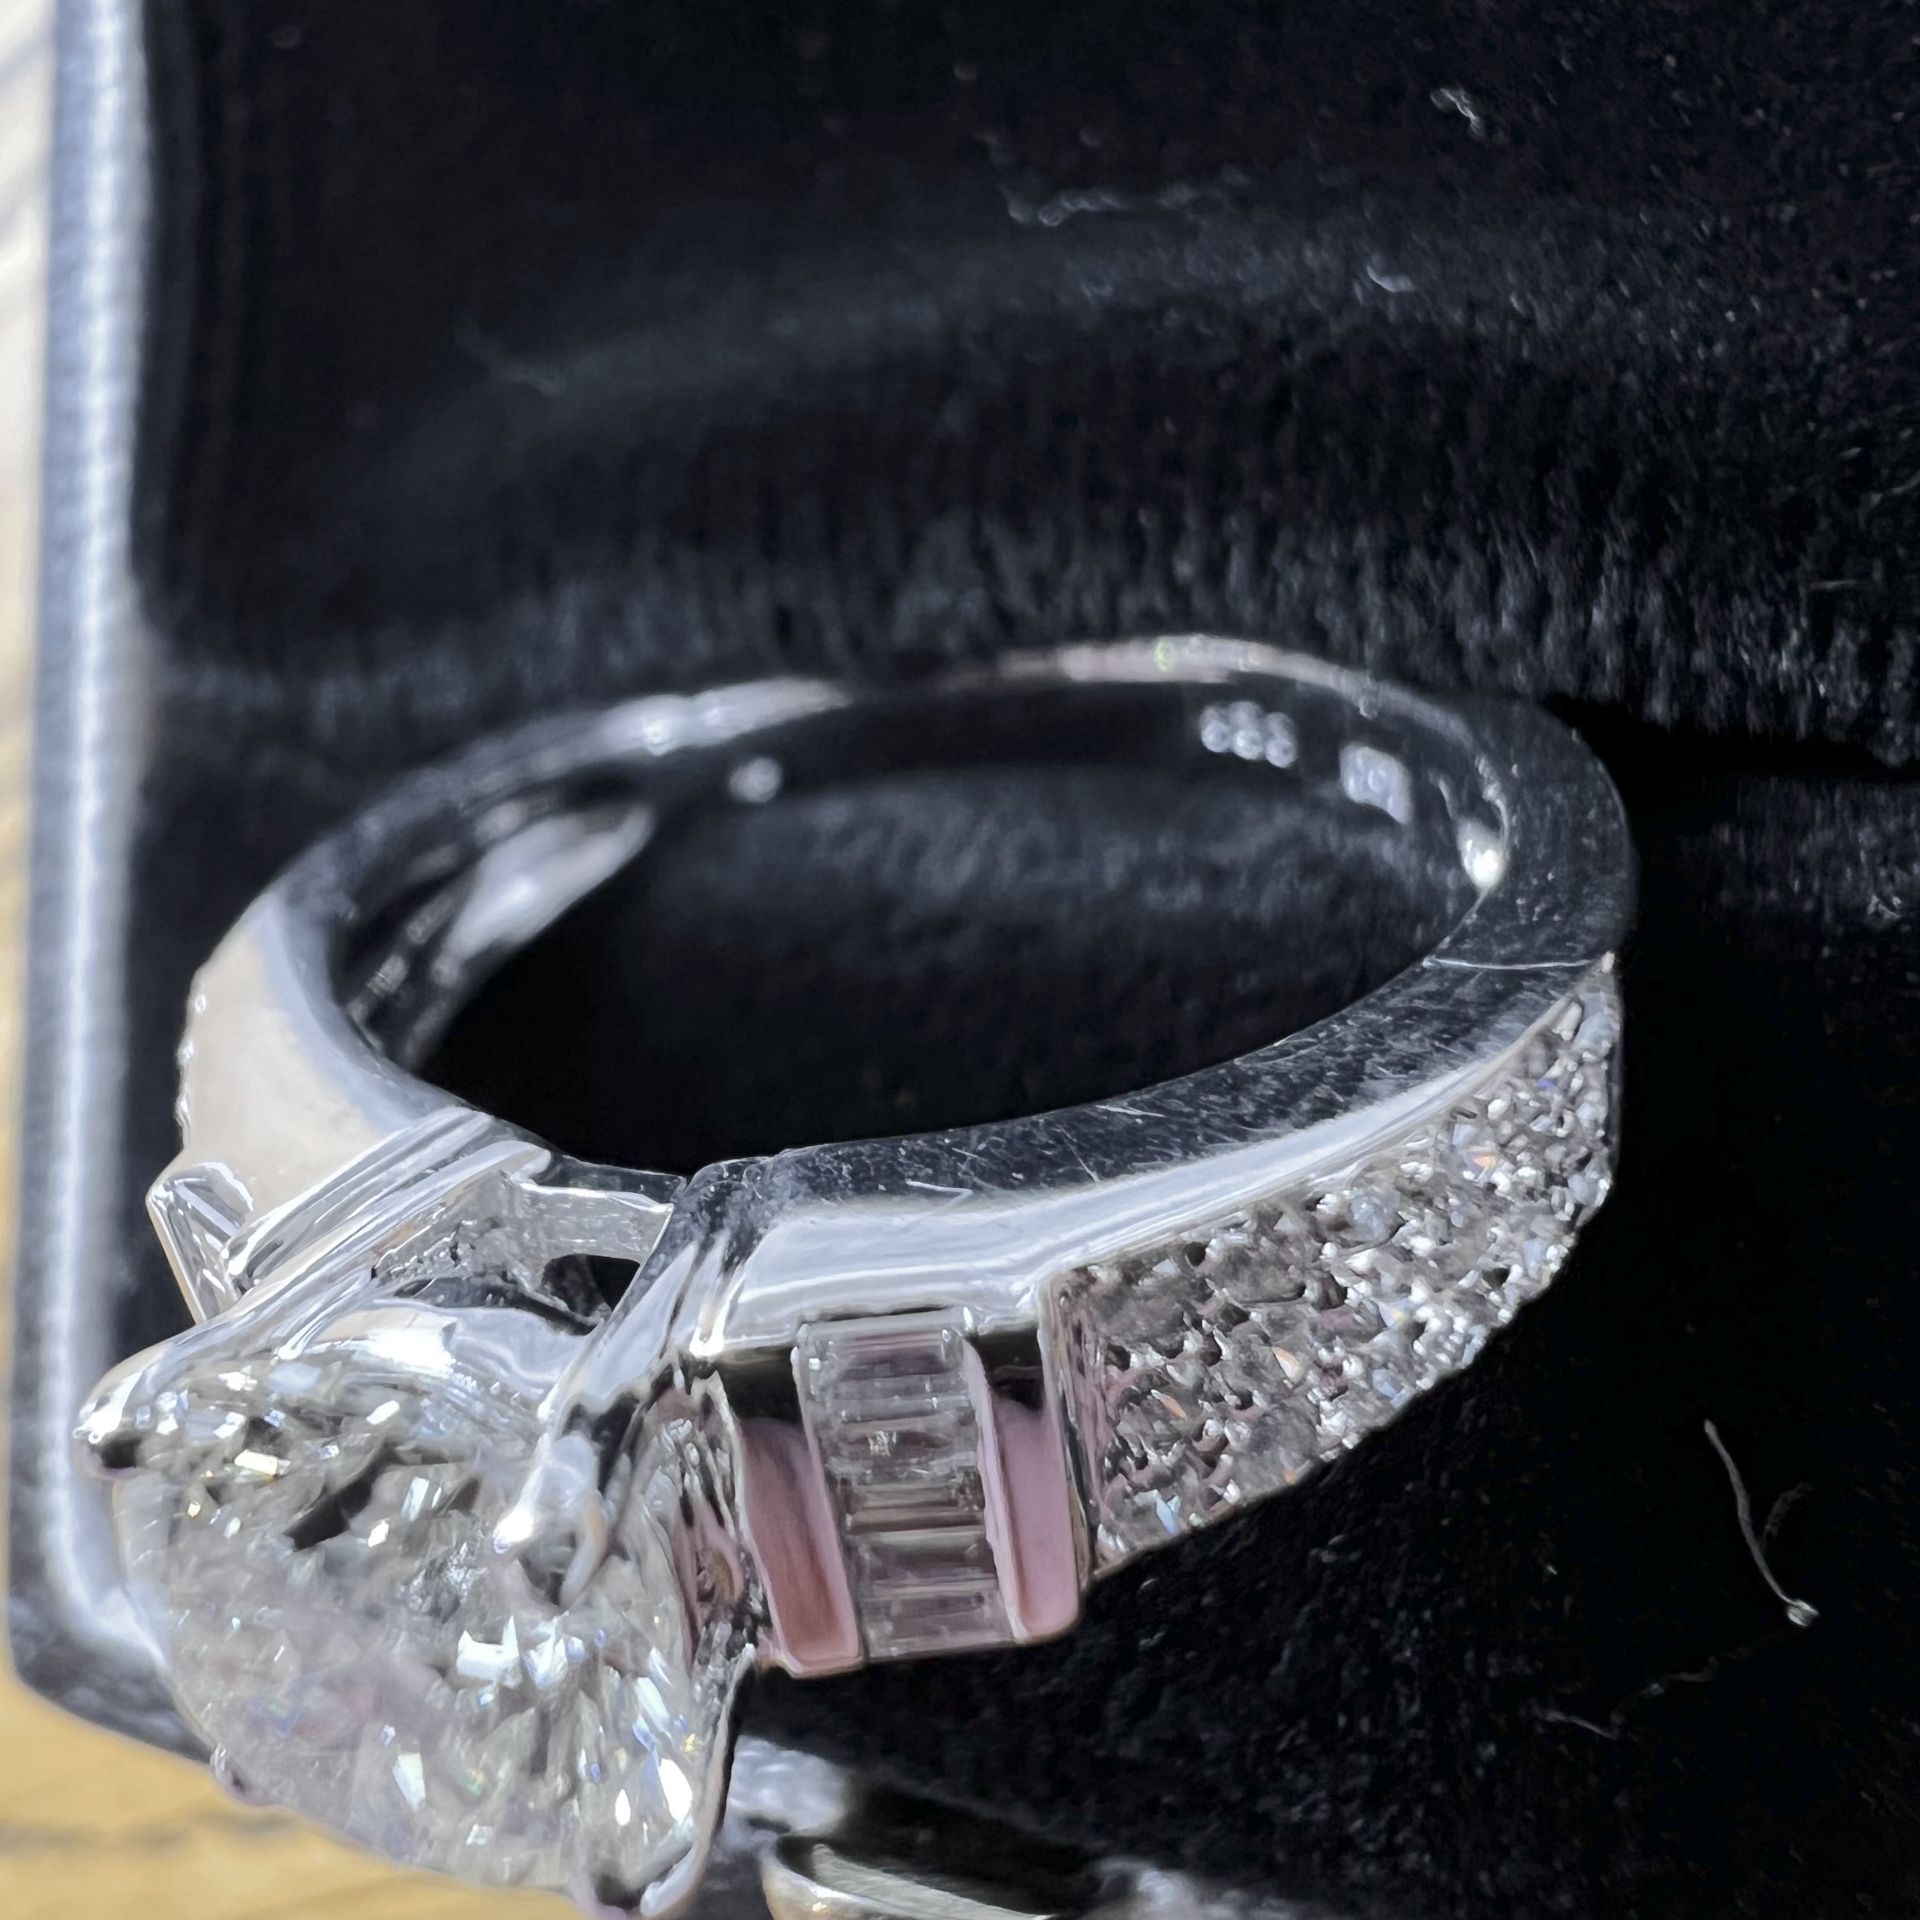 2.00CT DIAMOND RING IN 18CT WHITE GOLD (SIZE N) (APPROXIMATED TCW - CENTRE DIAMOND 1.25CT) - Image 2 of 3